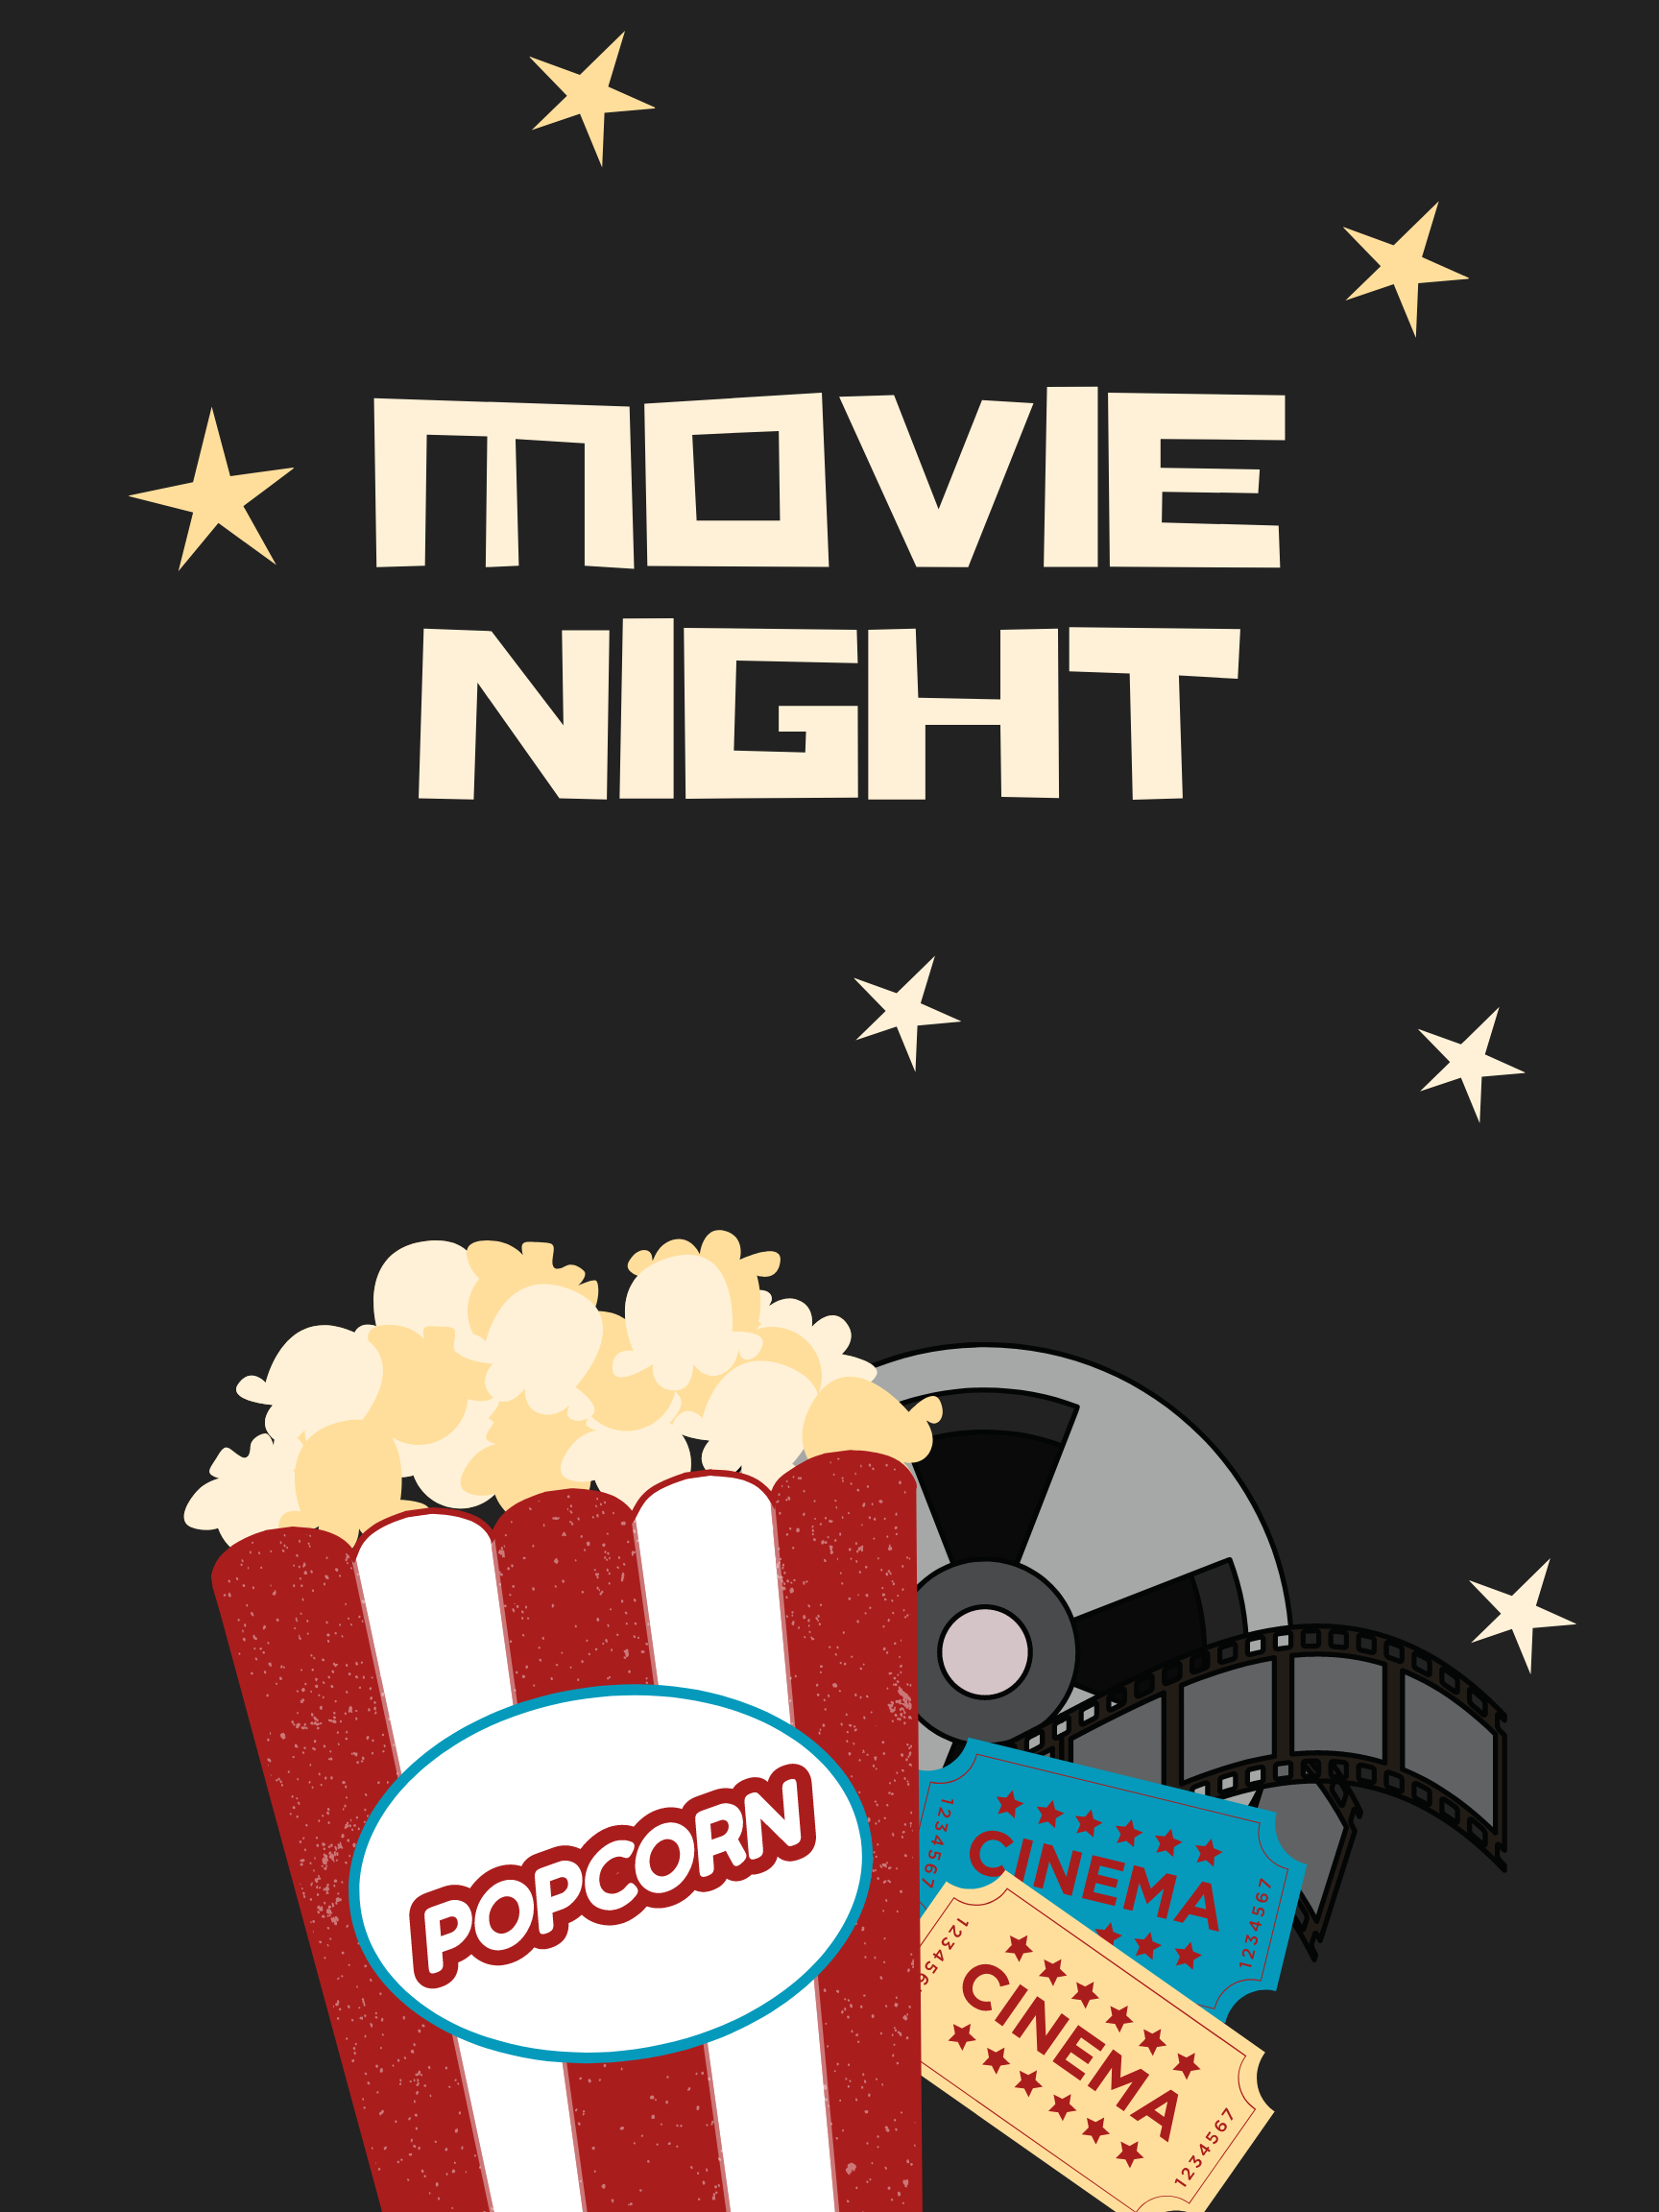 "movie night" poster with popcorn, reel and image